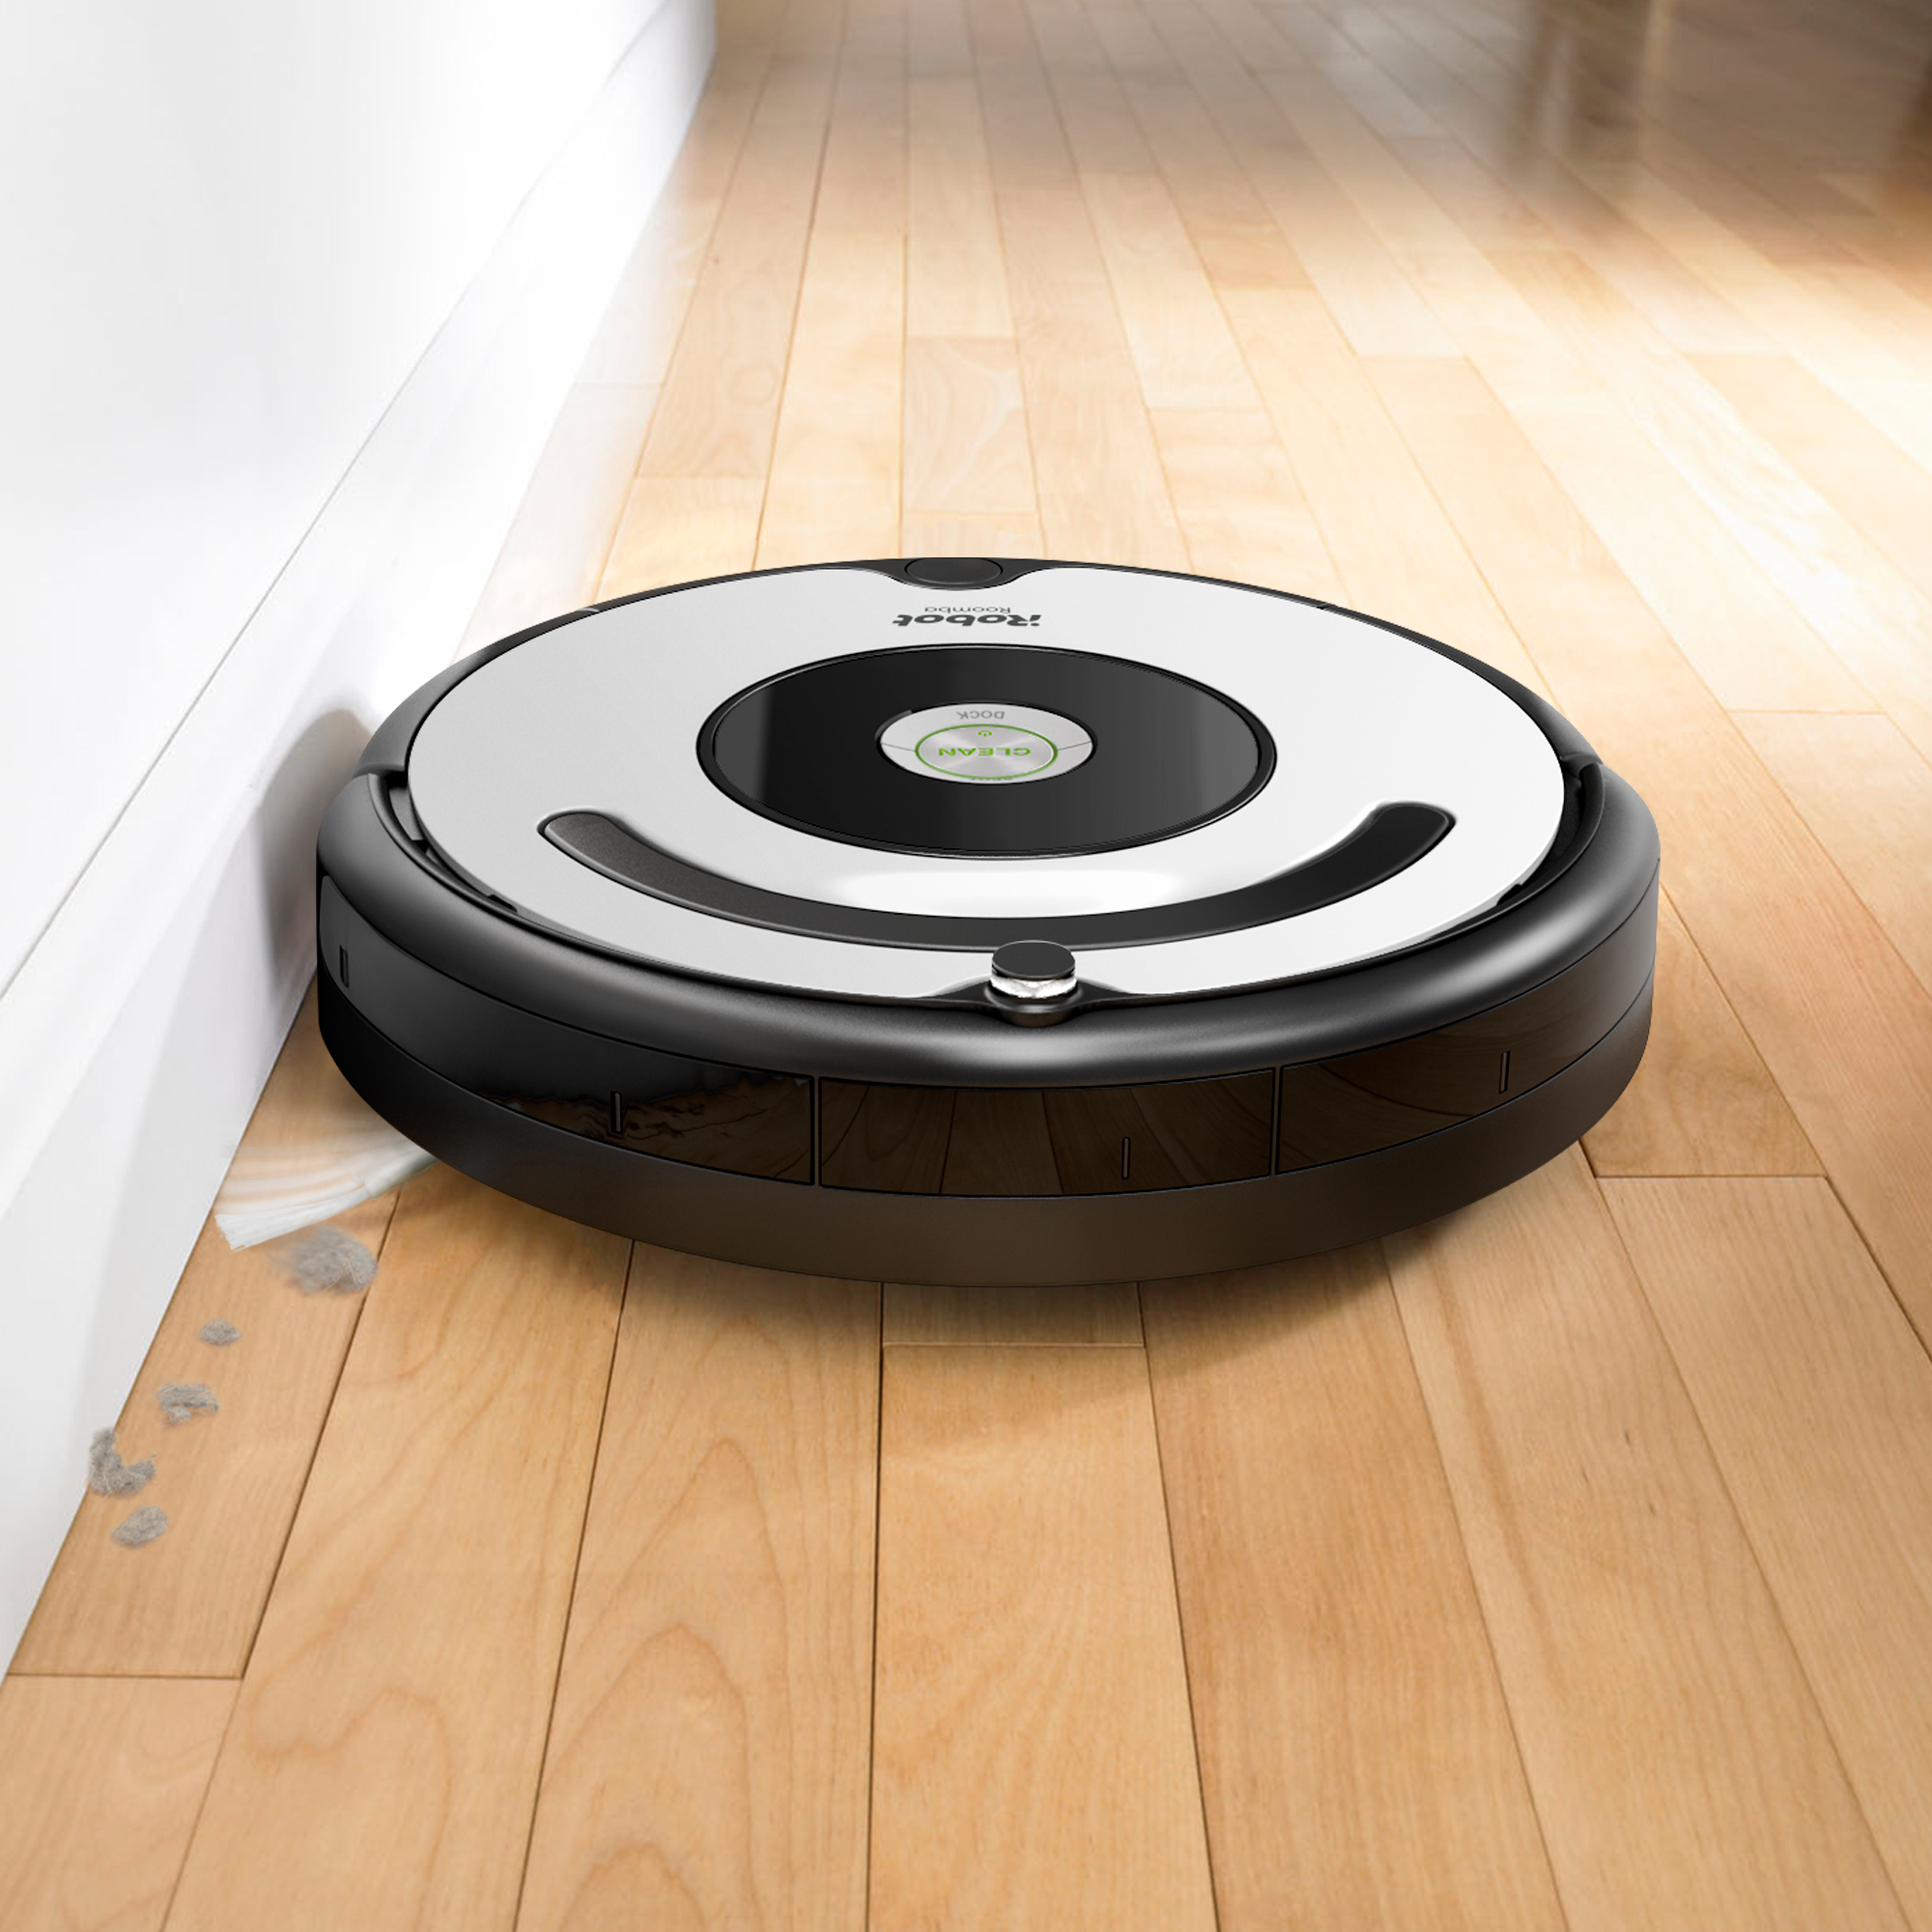 iRobot Roomba 670 Robot Vacuum-Wi-Fi Connectivity, Works with Google Home, Good for Pet Hair, Carpets, Hard Floors, Self-Charging - image 6 of 12